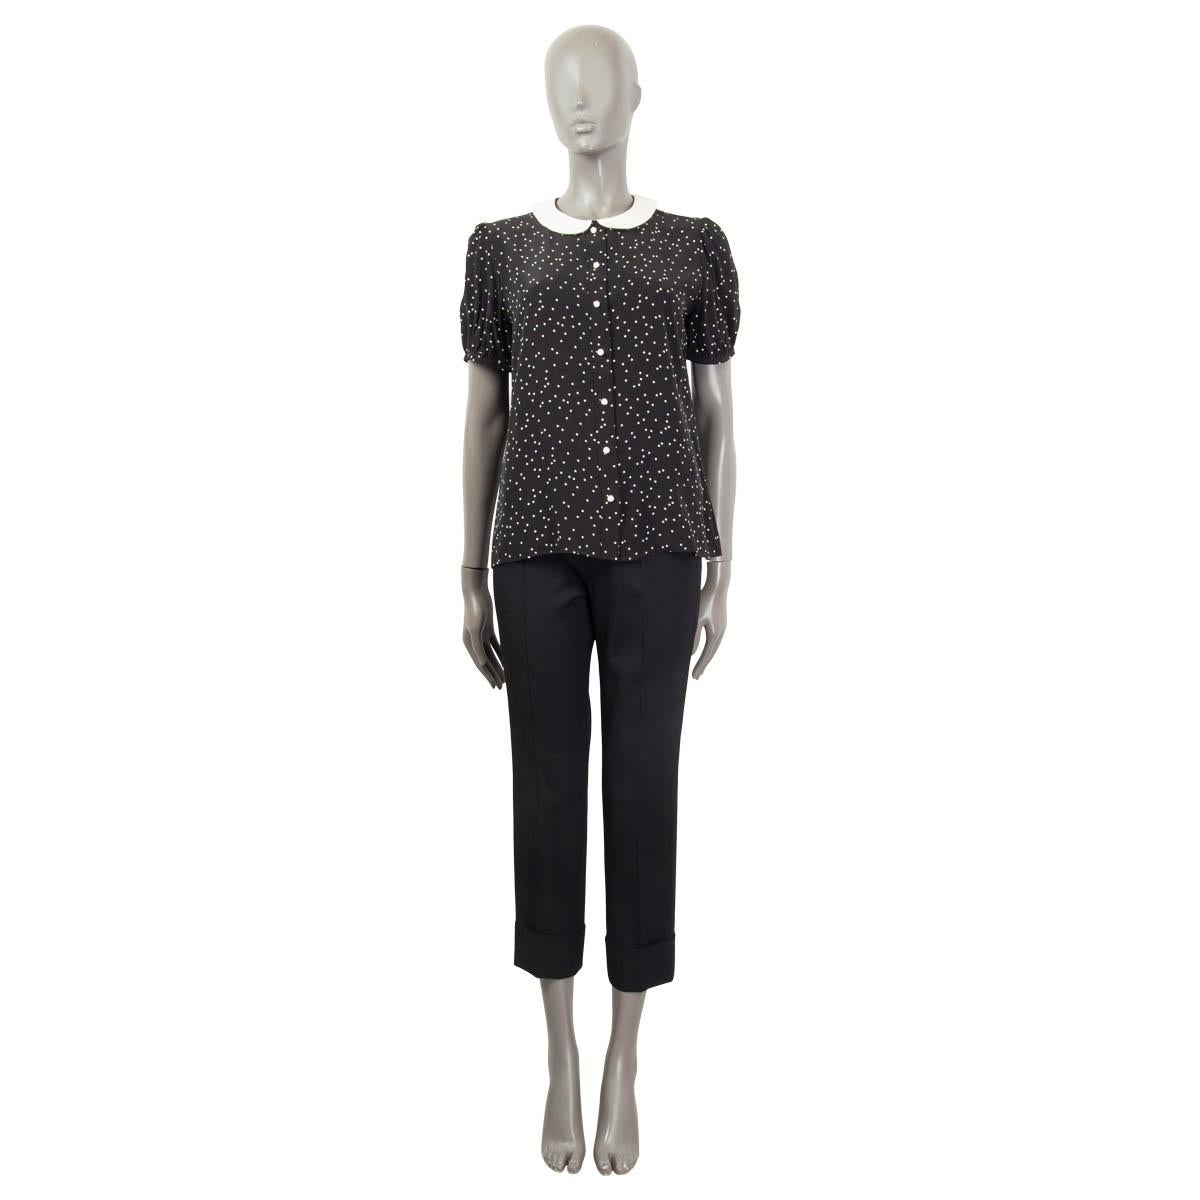 100% authentic Saint Laurent short sleeve polka dot shirt in black and white silk (100%). Features a white peter pan collar and opens with seven white rose buttons on the front. Unlined. Has been worn and is in excellent condition.

Measurements
Tag